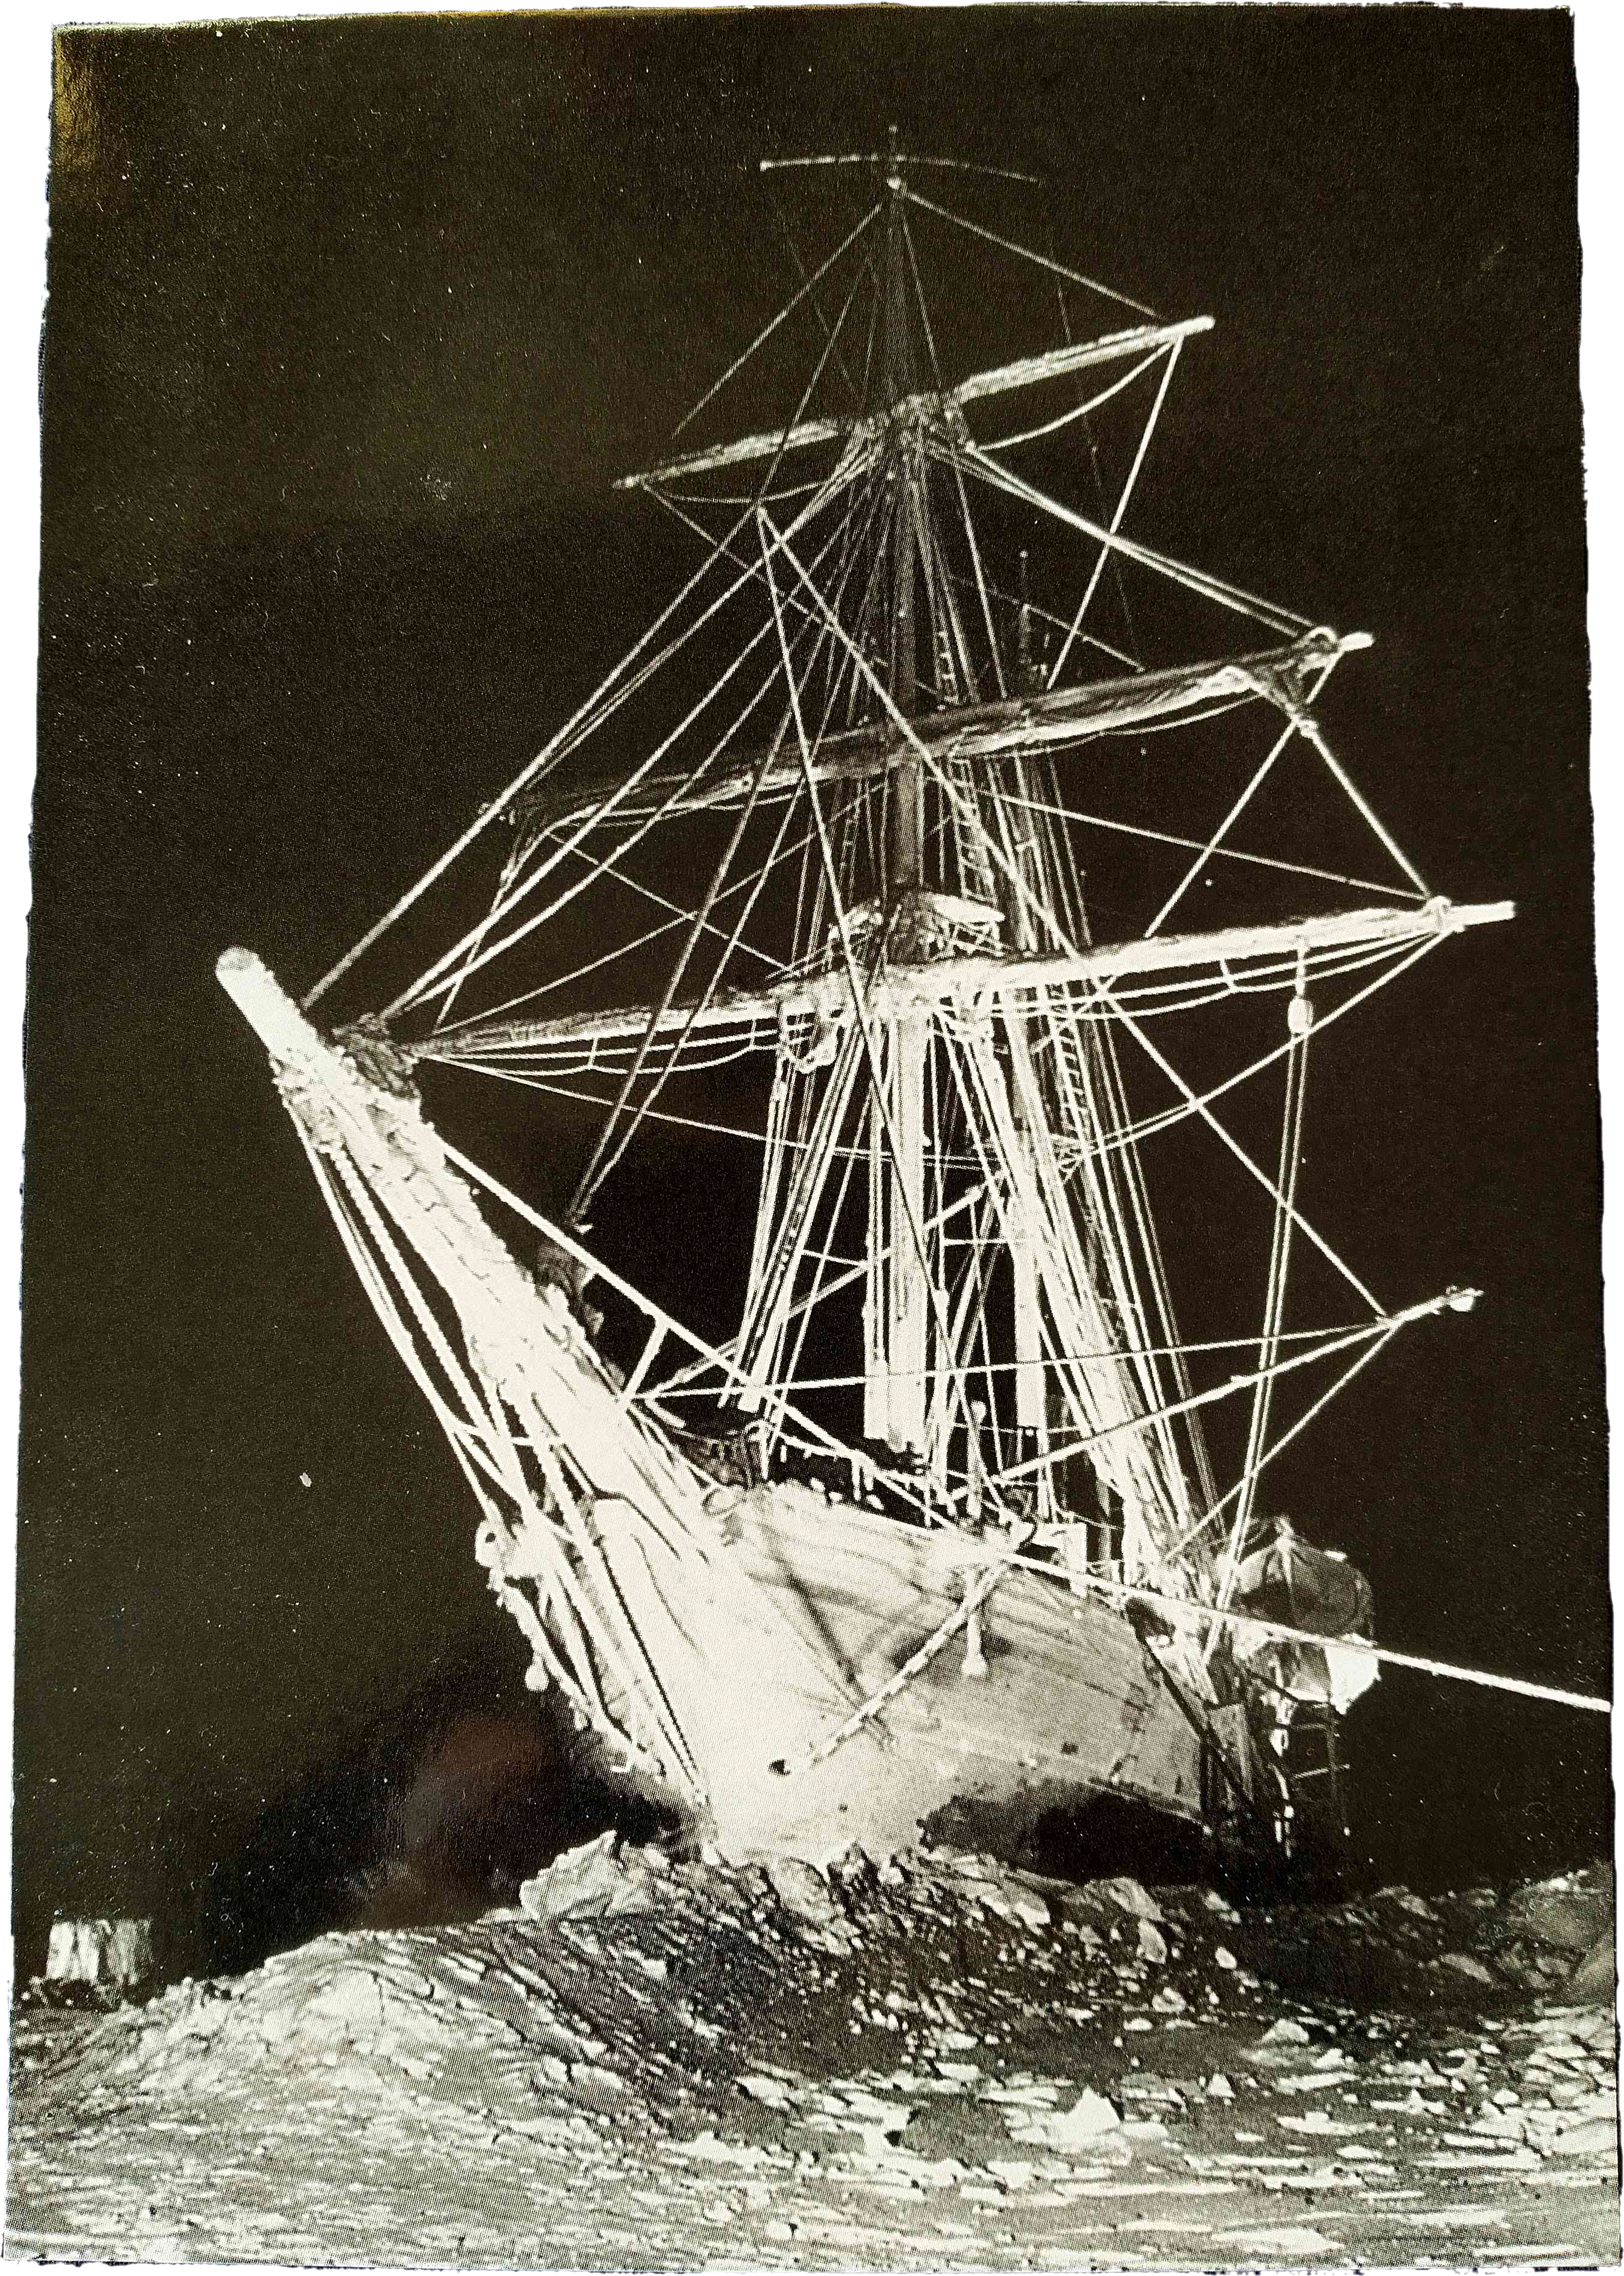 A black and white photograph of a ship trapped in ice